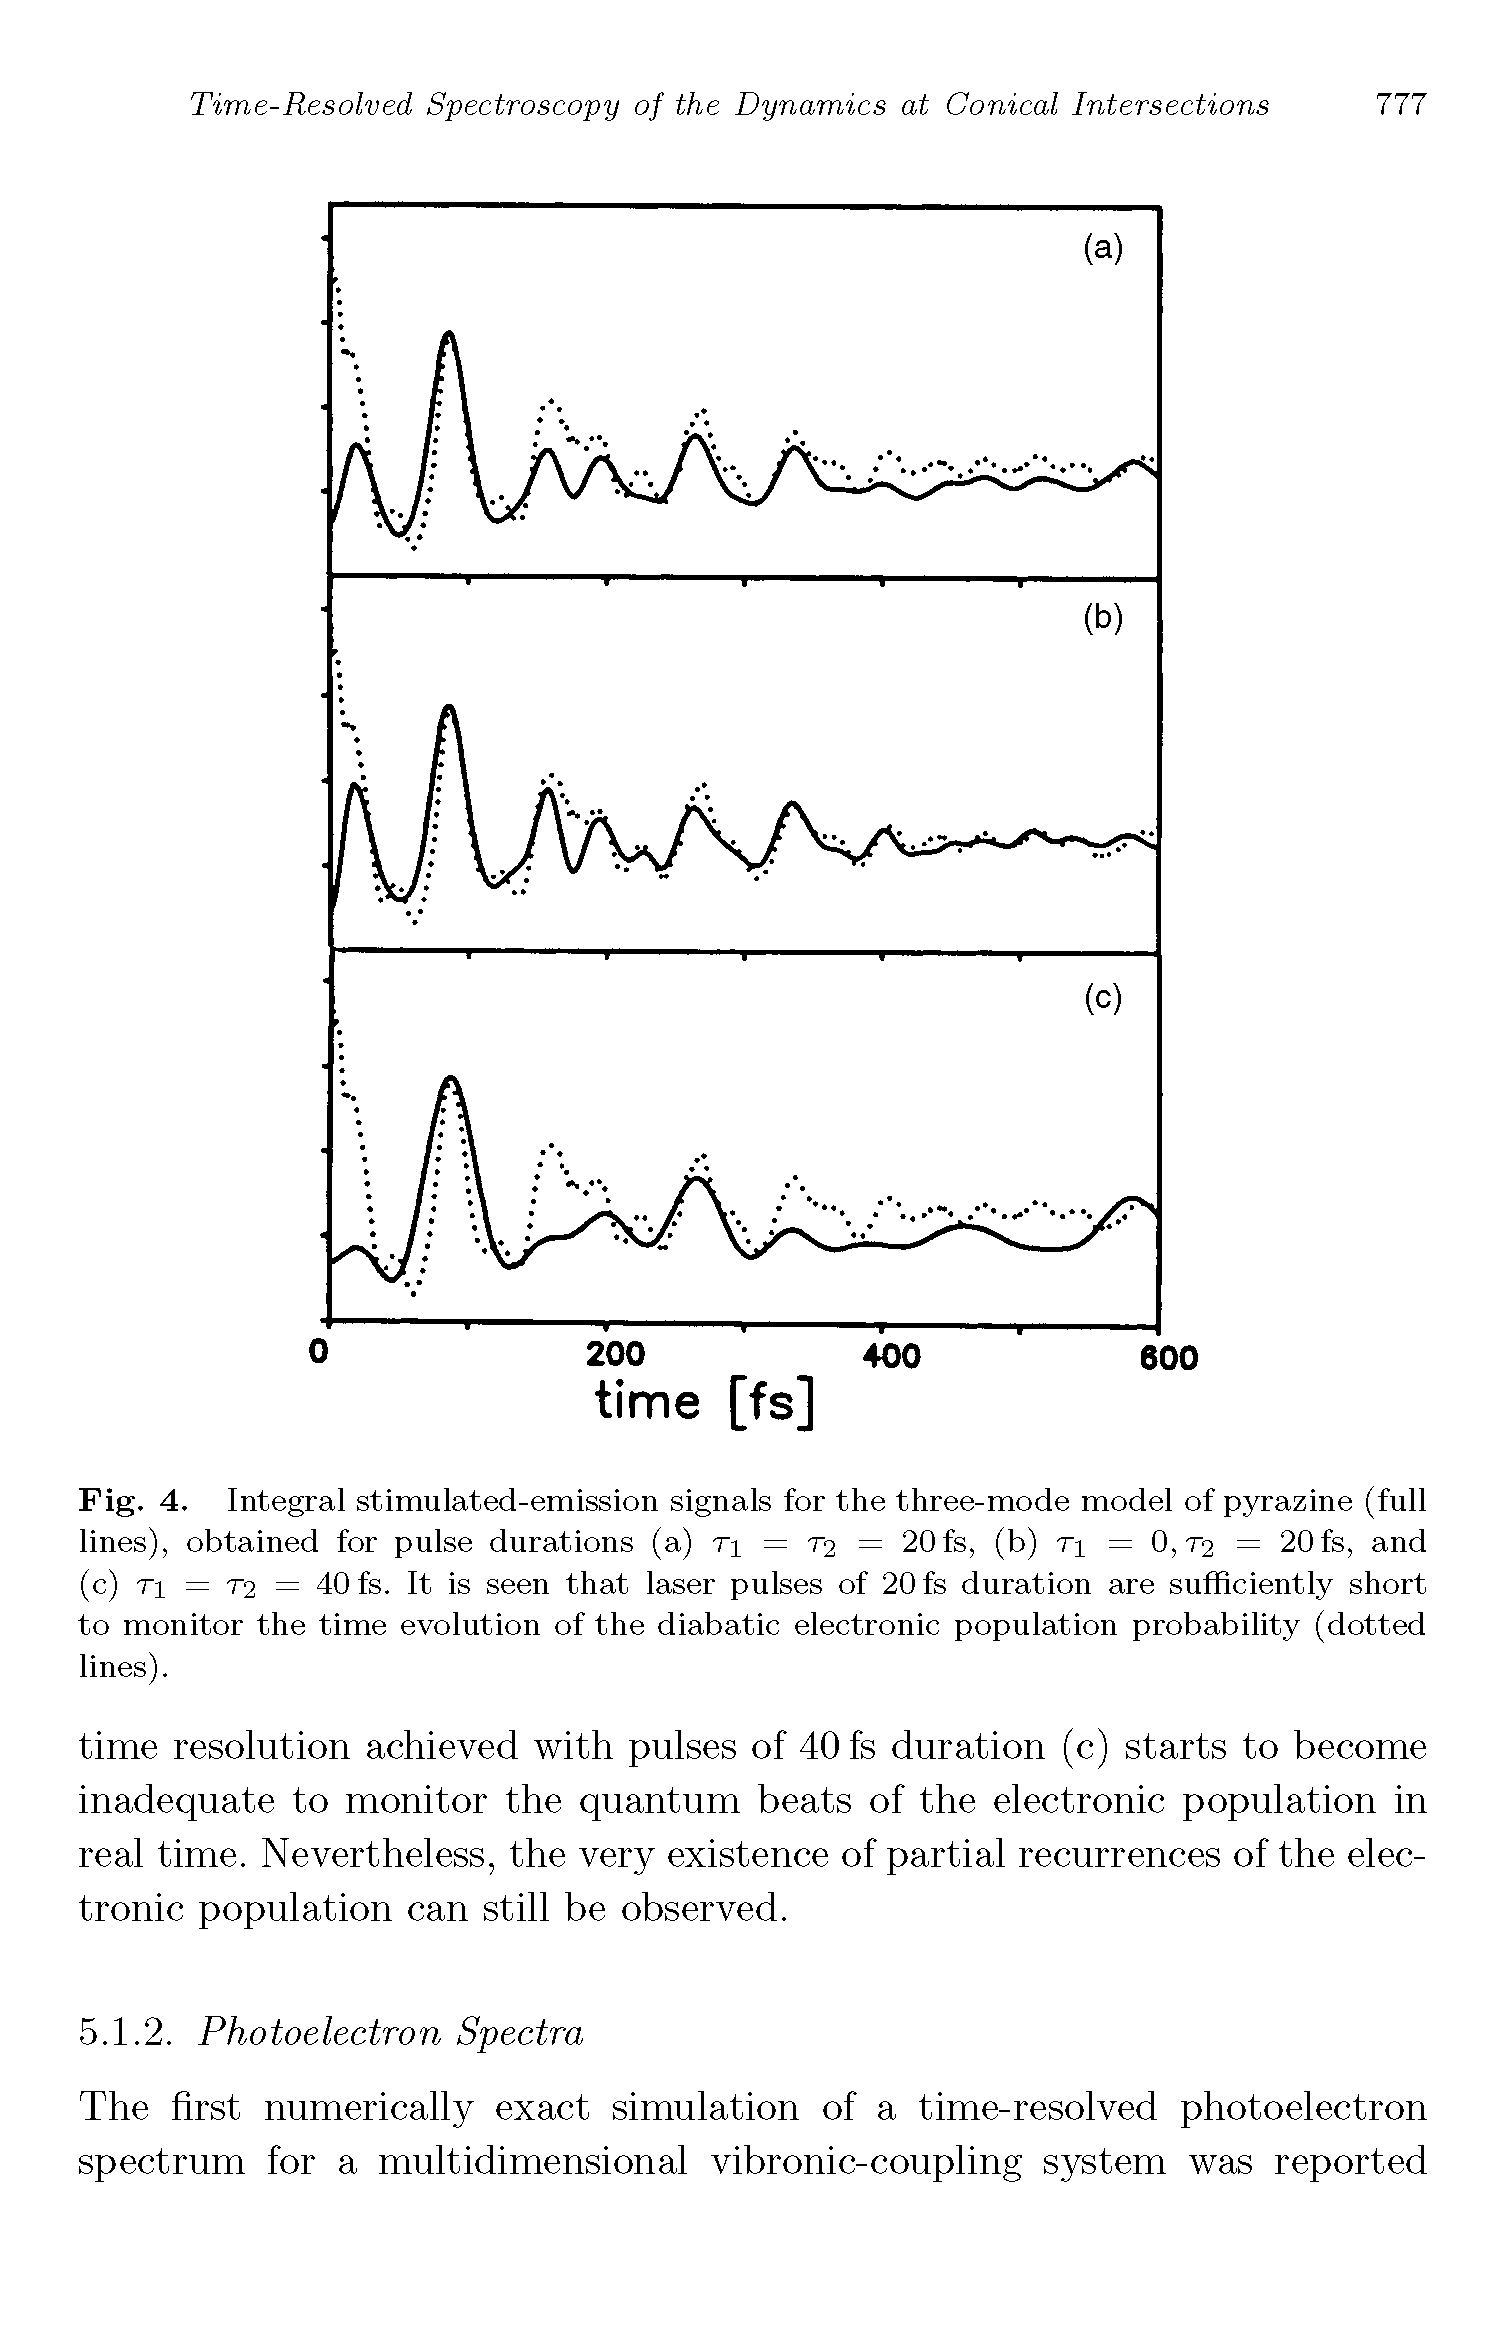 Fig. 4. Integral stimulated-emission signals for the three-mode model of pyrazine (full lines), obtained for pulse durations (a) t = T2 = 20fs, (b) t = 0,T2 = 20fs, and (c) Ti = T2 = 40 fs. It is seen that laser pulses of 20 fs duration are sufficiently short to monitor the time evolution of the diabatic electronic population probability (dotted lines).